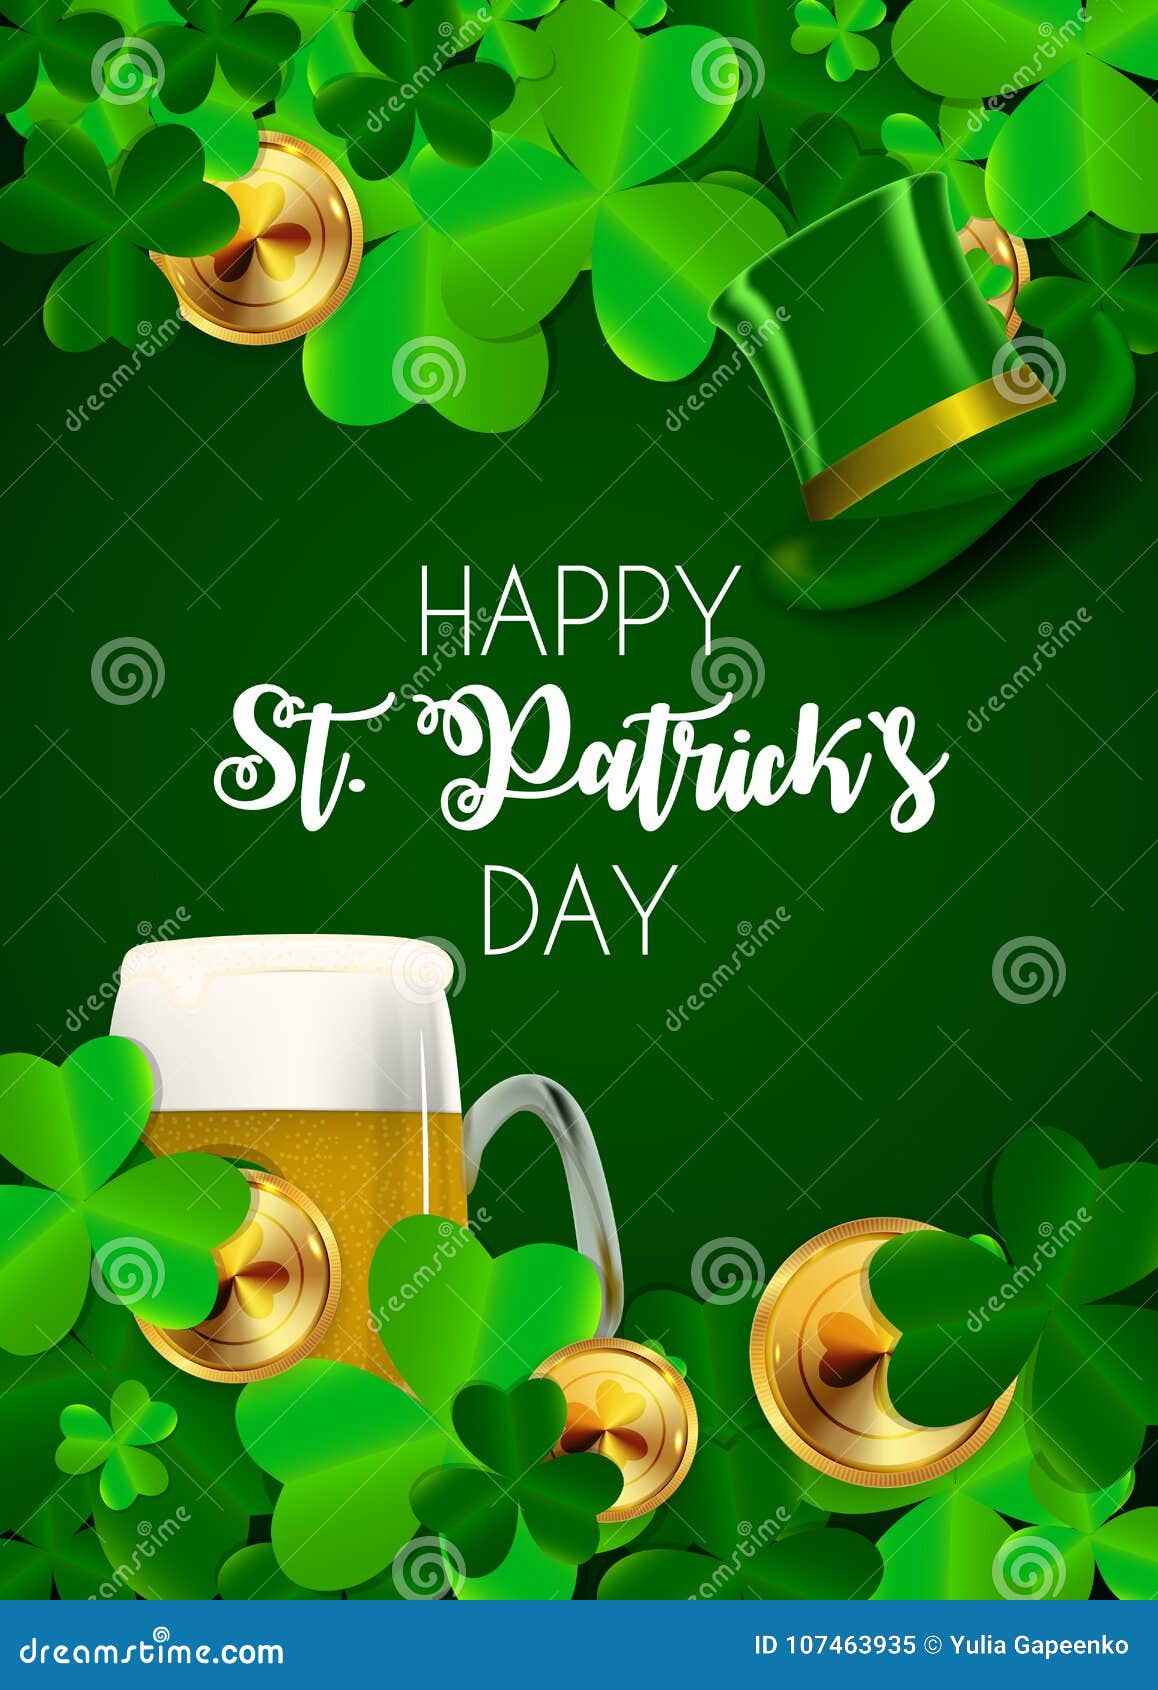 Happy Saint Patricks Day Background with Clover Leaves. Vector ...